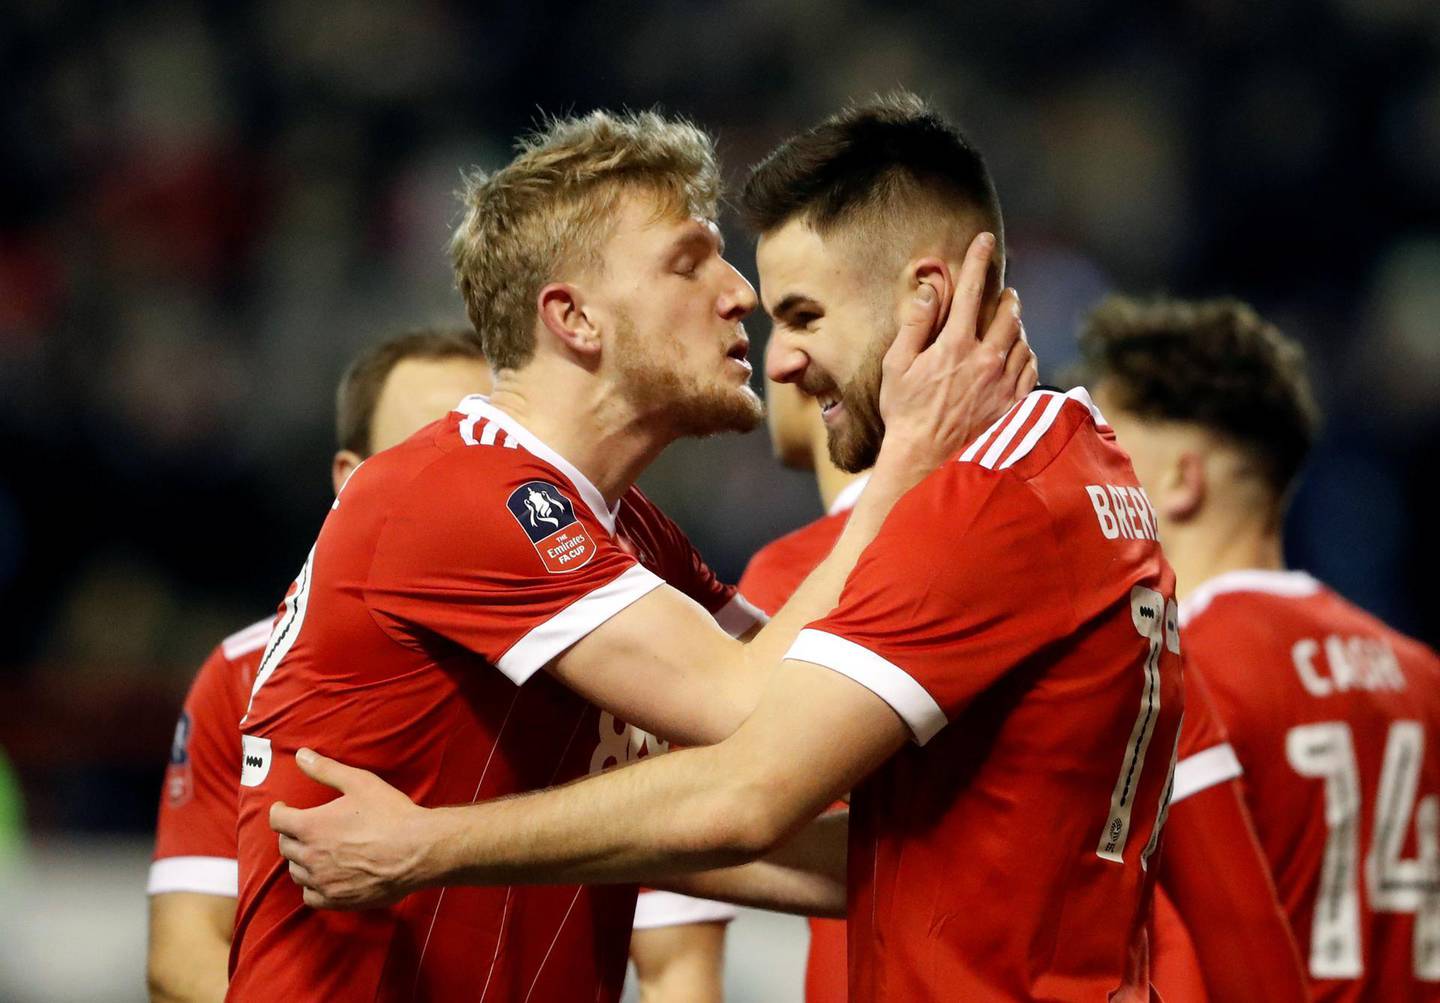 Soccer Football - FA Cup Third Round - Nottingham Forest vs Arsenal - The City Ground, Nottingham, Britain - January 7, 2018   Nottingham Forest's Ben Brereton celebrates scoring their third goal with Joe Worrall   Action Images via Reuters/Carl Recine